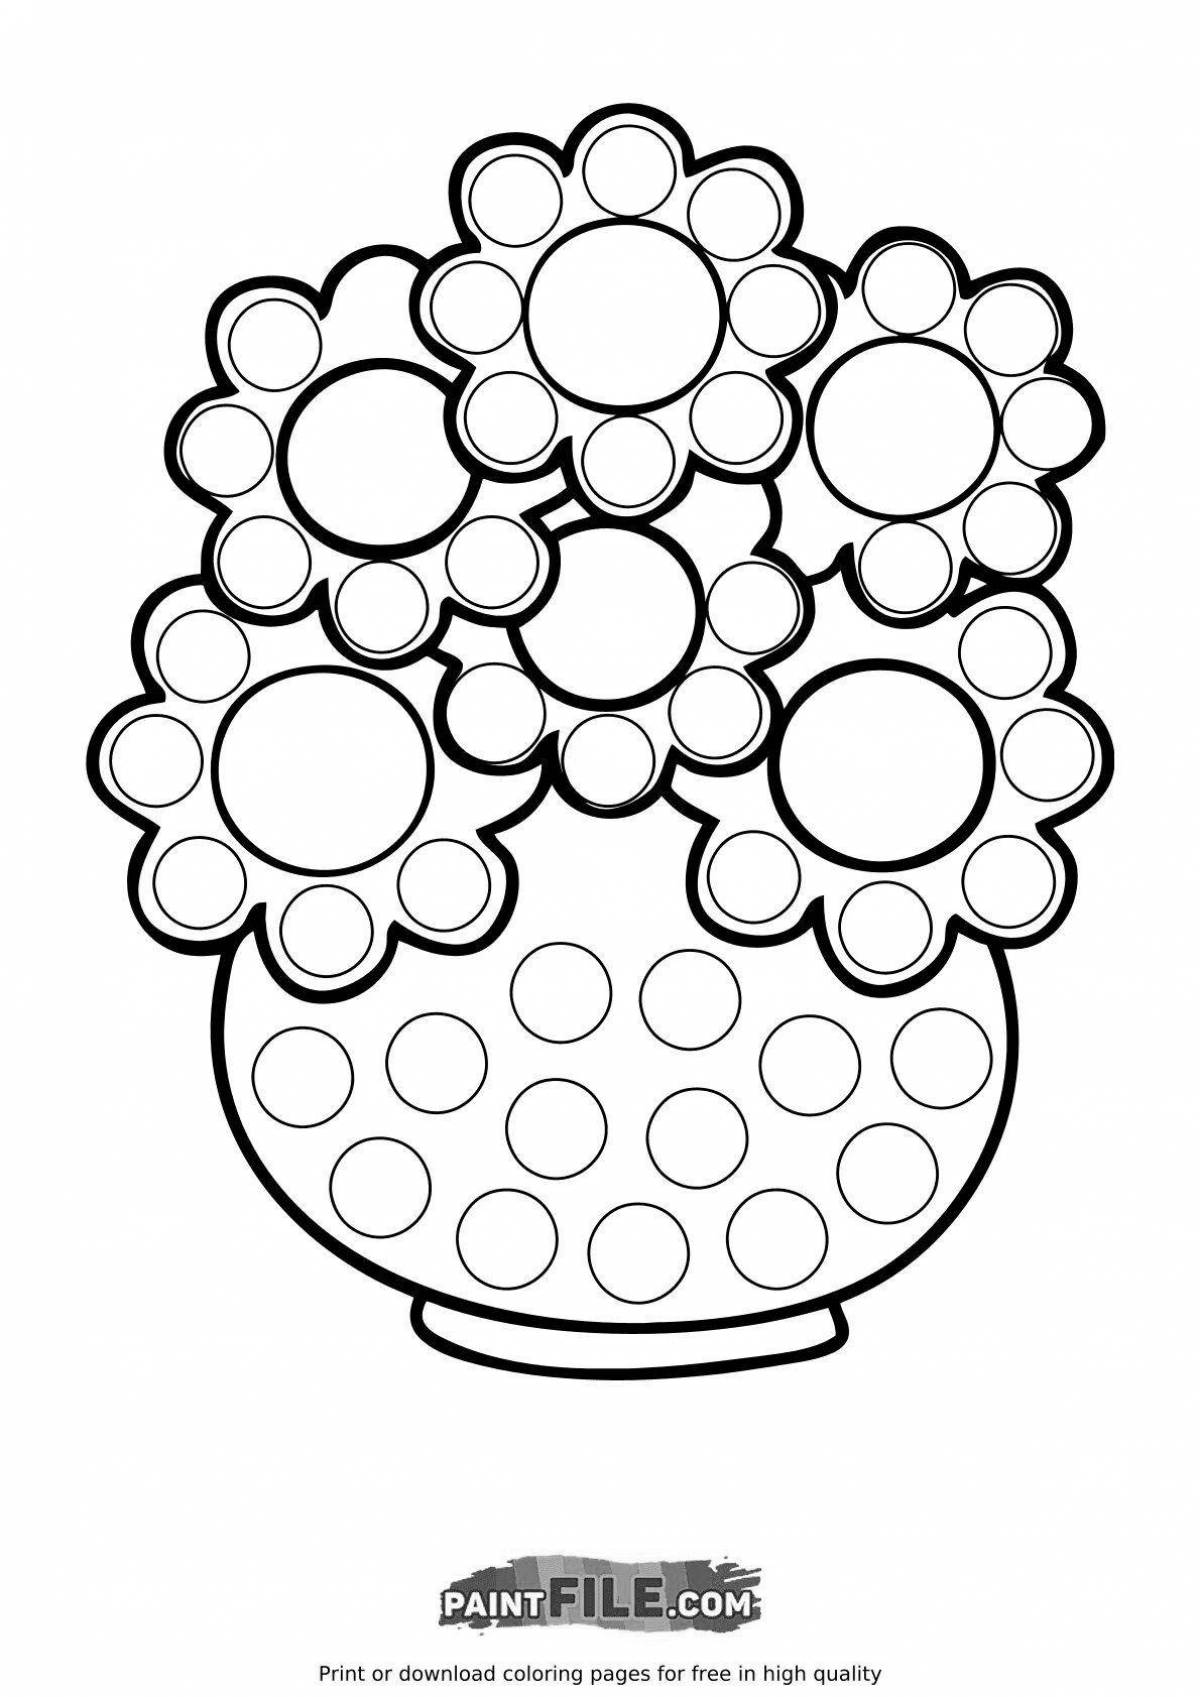 Phenomenal cotton buds coloring pages for kids